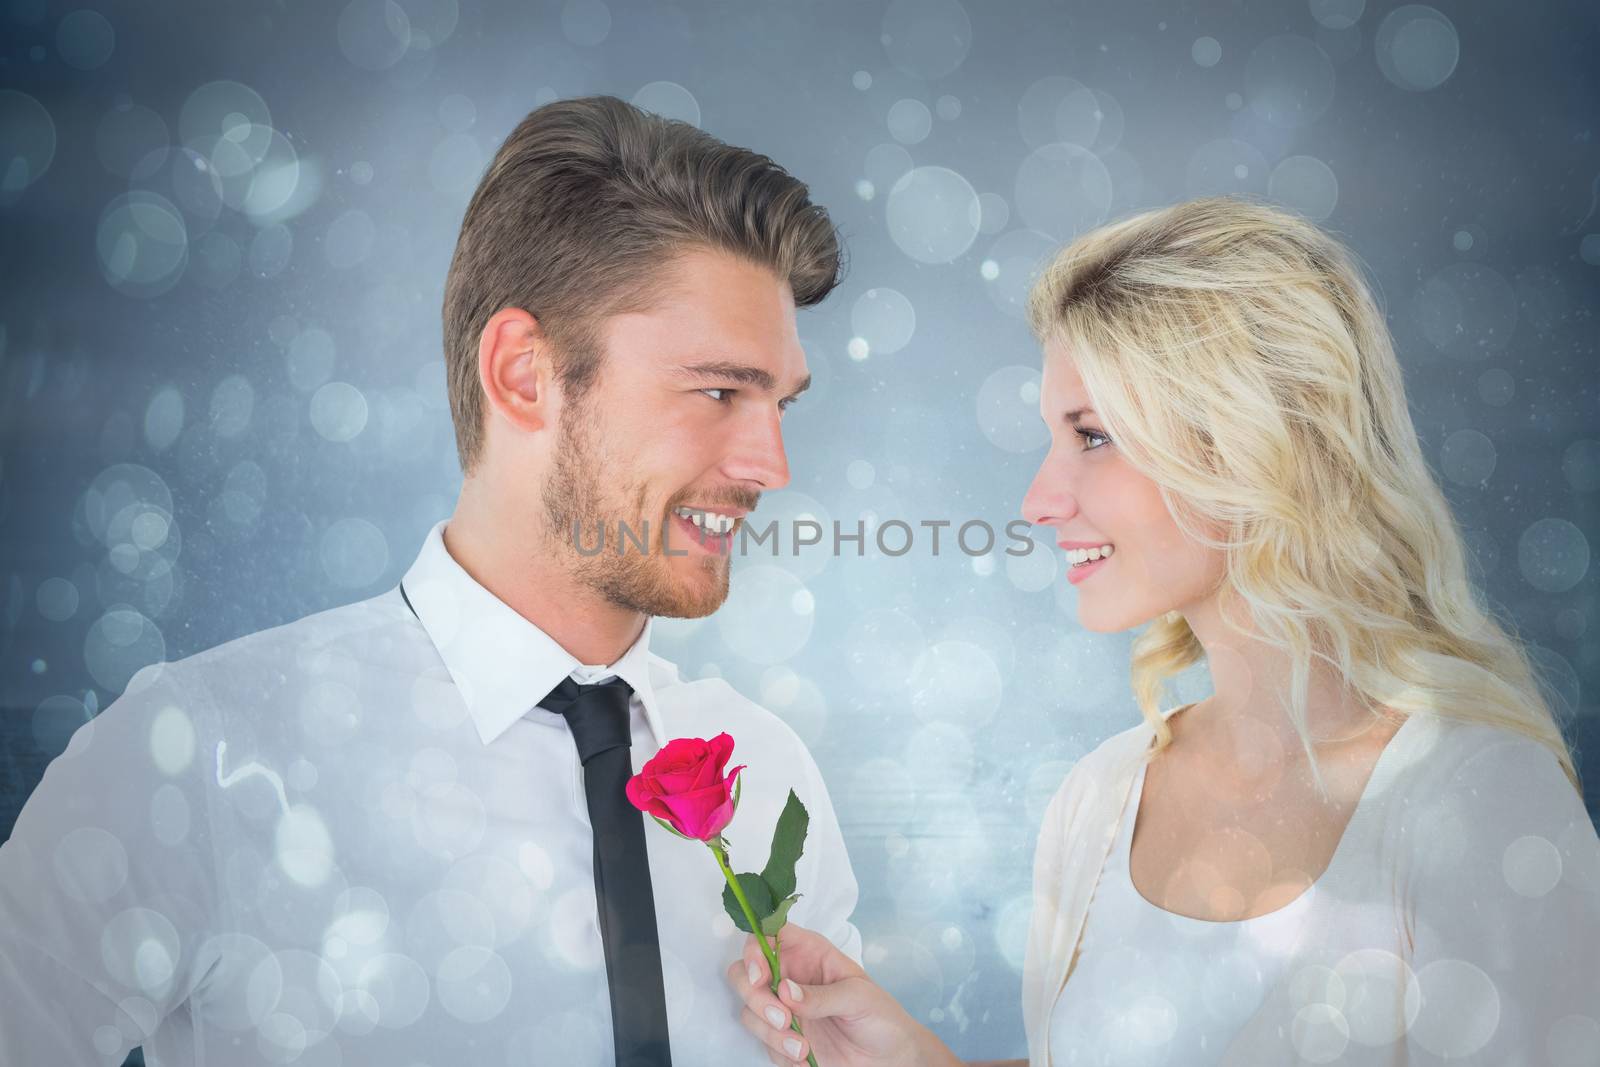 Composite image of handsome man smiling at girlfriend holding a rose by Wavebreakmedia